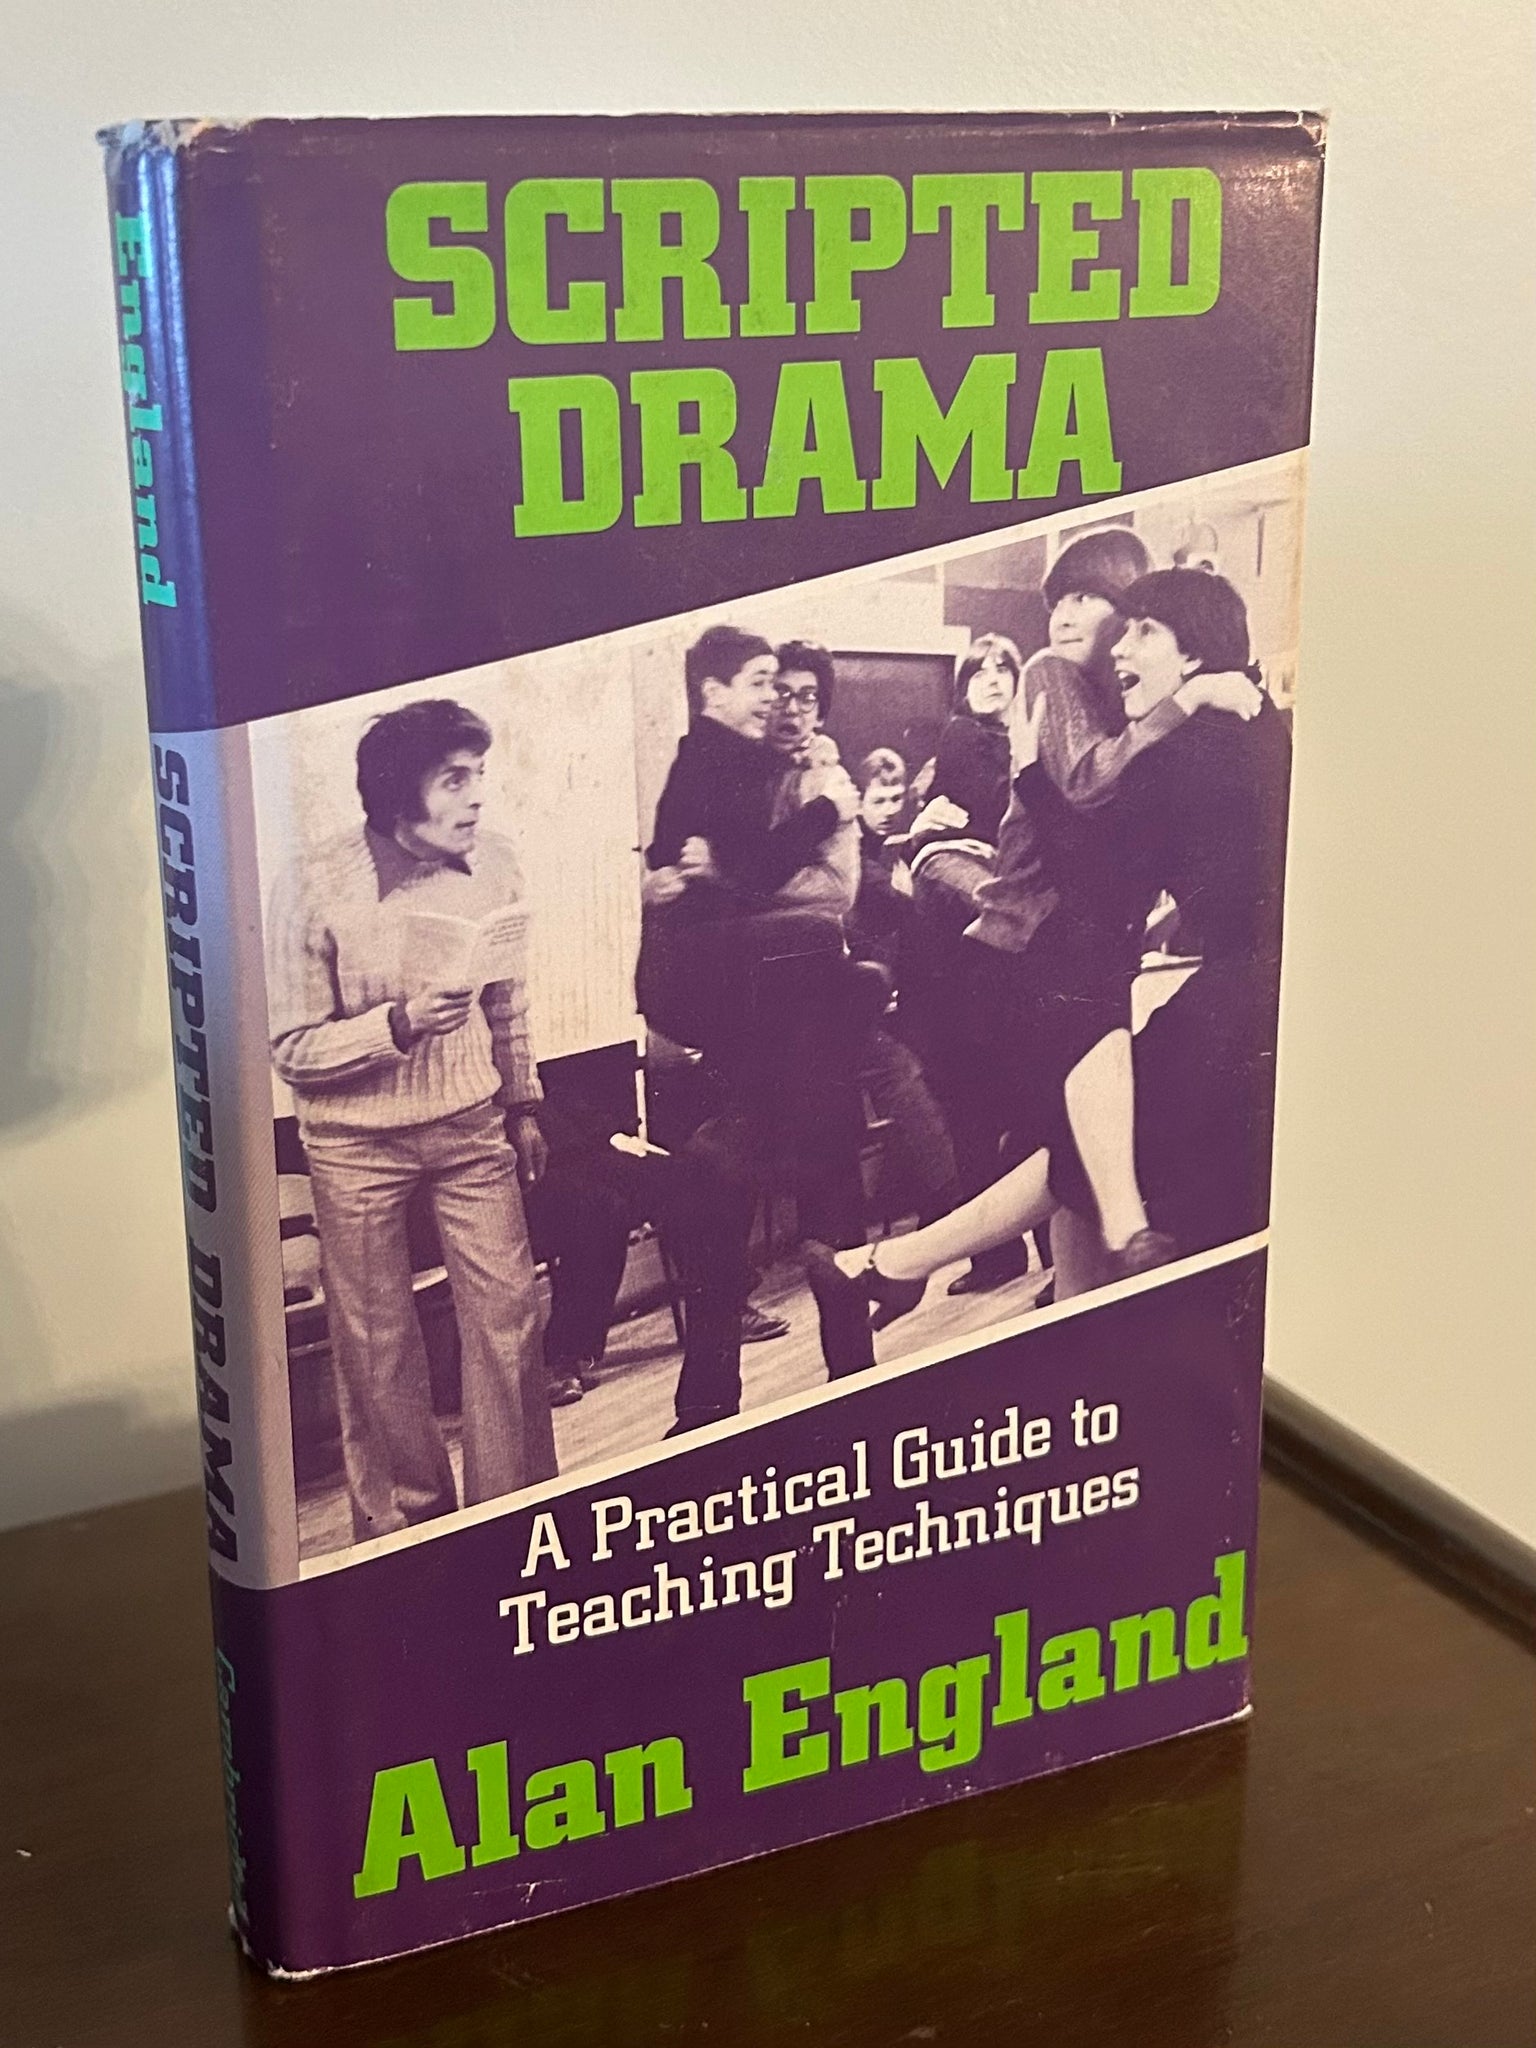 Scripted Drama  A Practical Guide to Teaching Techniques